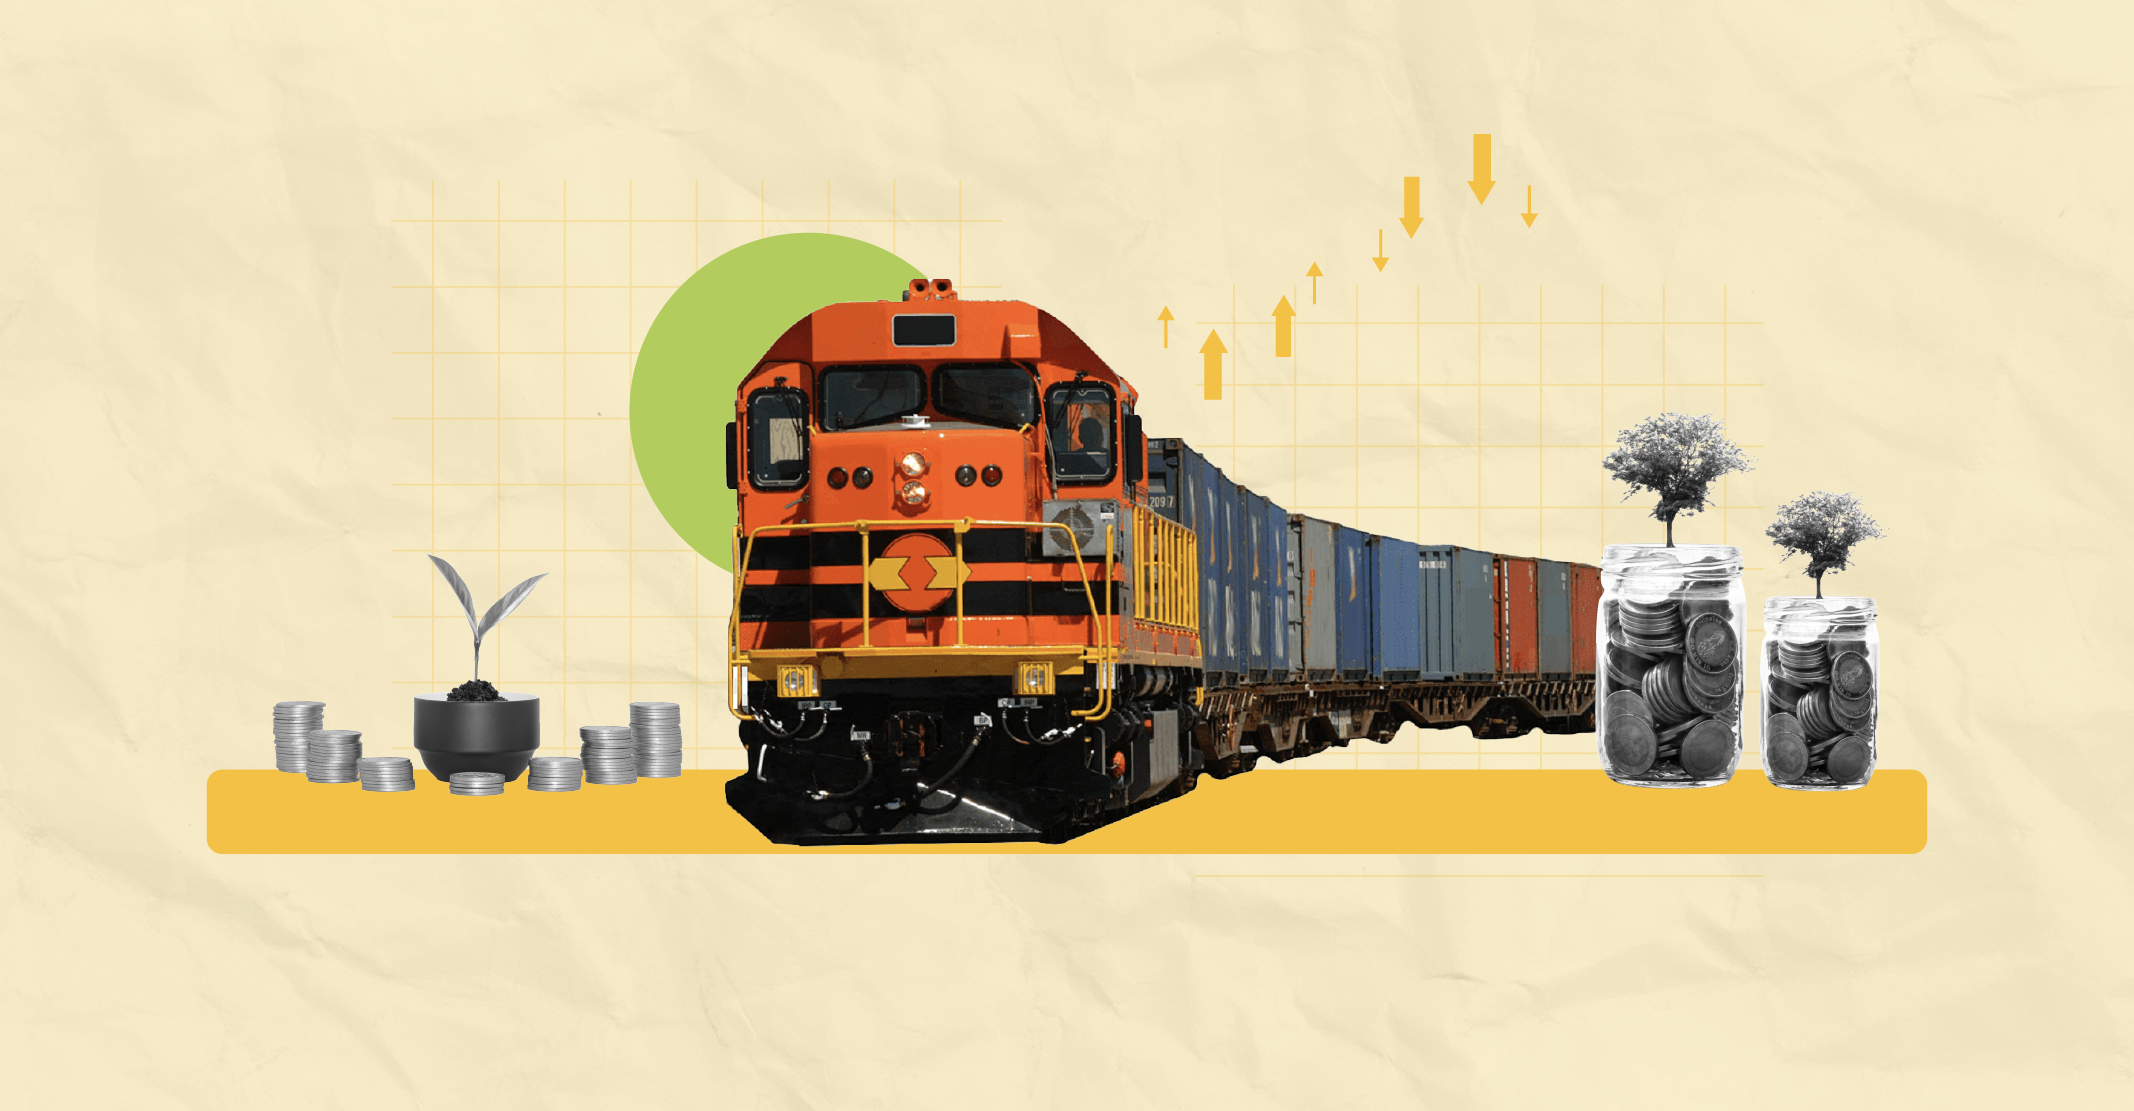 List of Railway Stocks in India (2023) - Blog by Tickertape